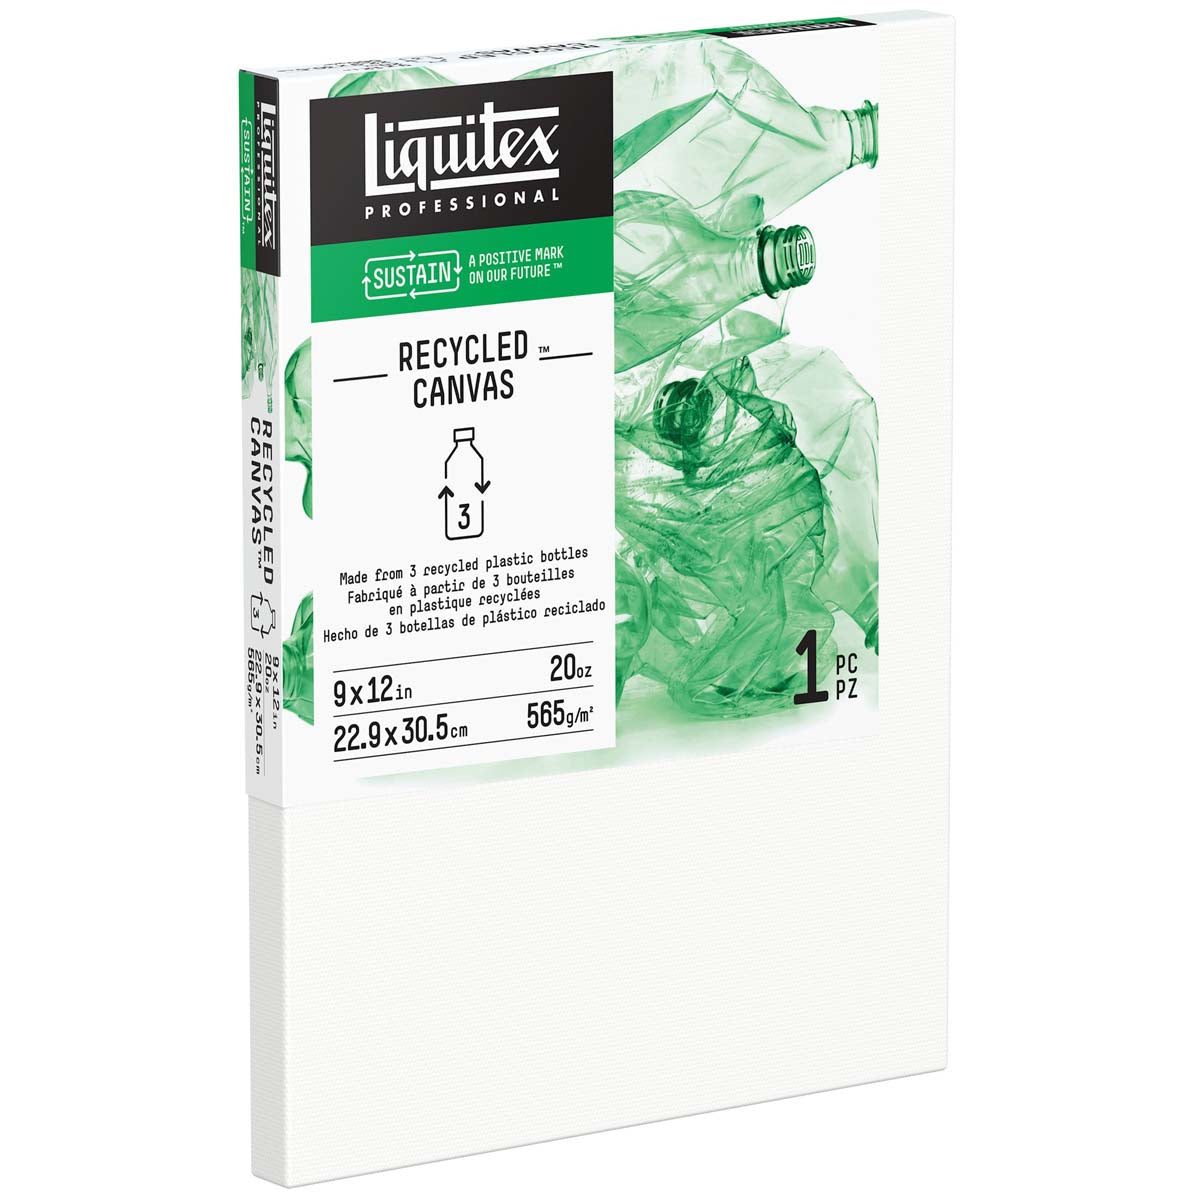 Liquitex Recycled Canvas - Standard Edge - 9x12 inches - 23x30cm